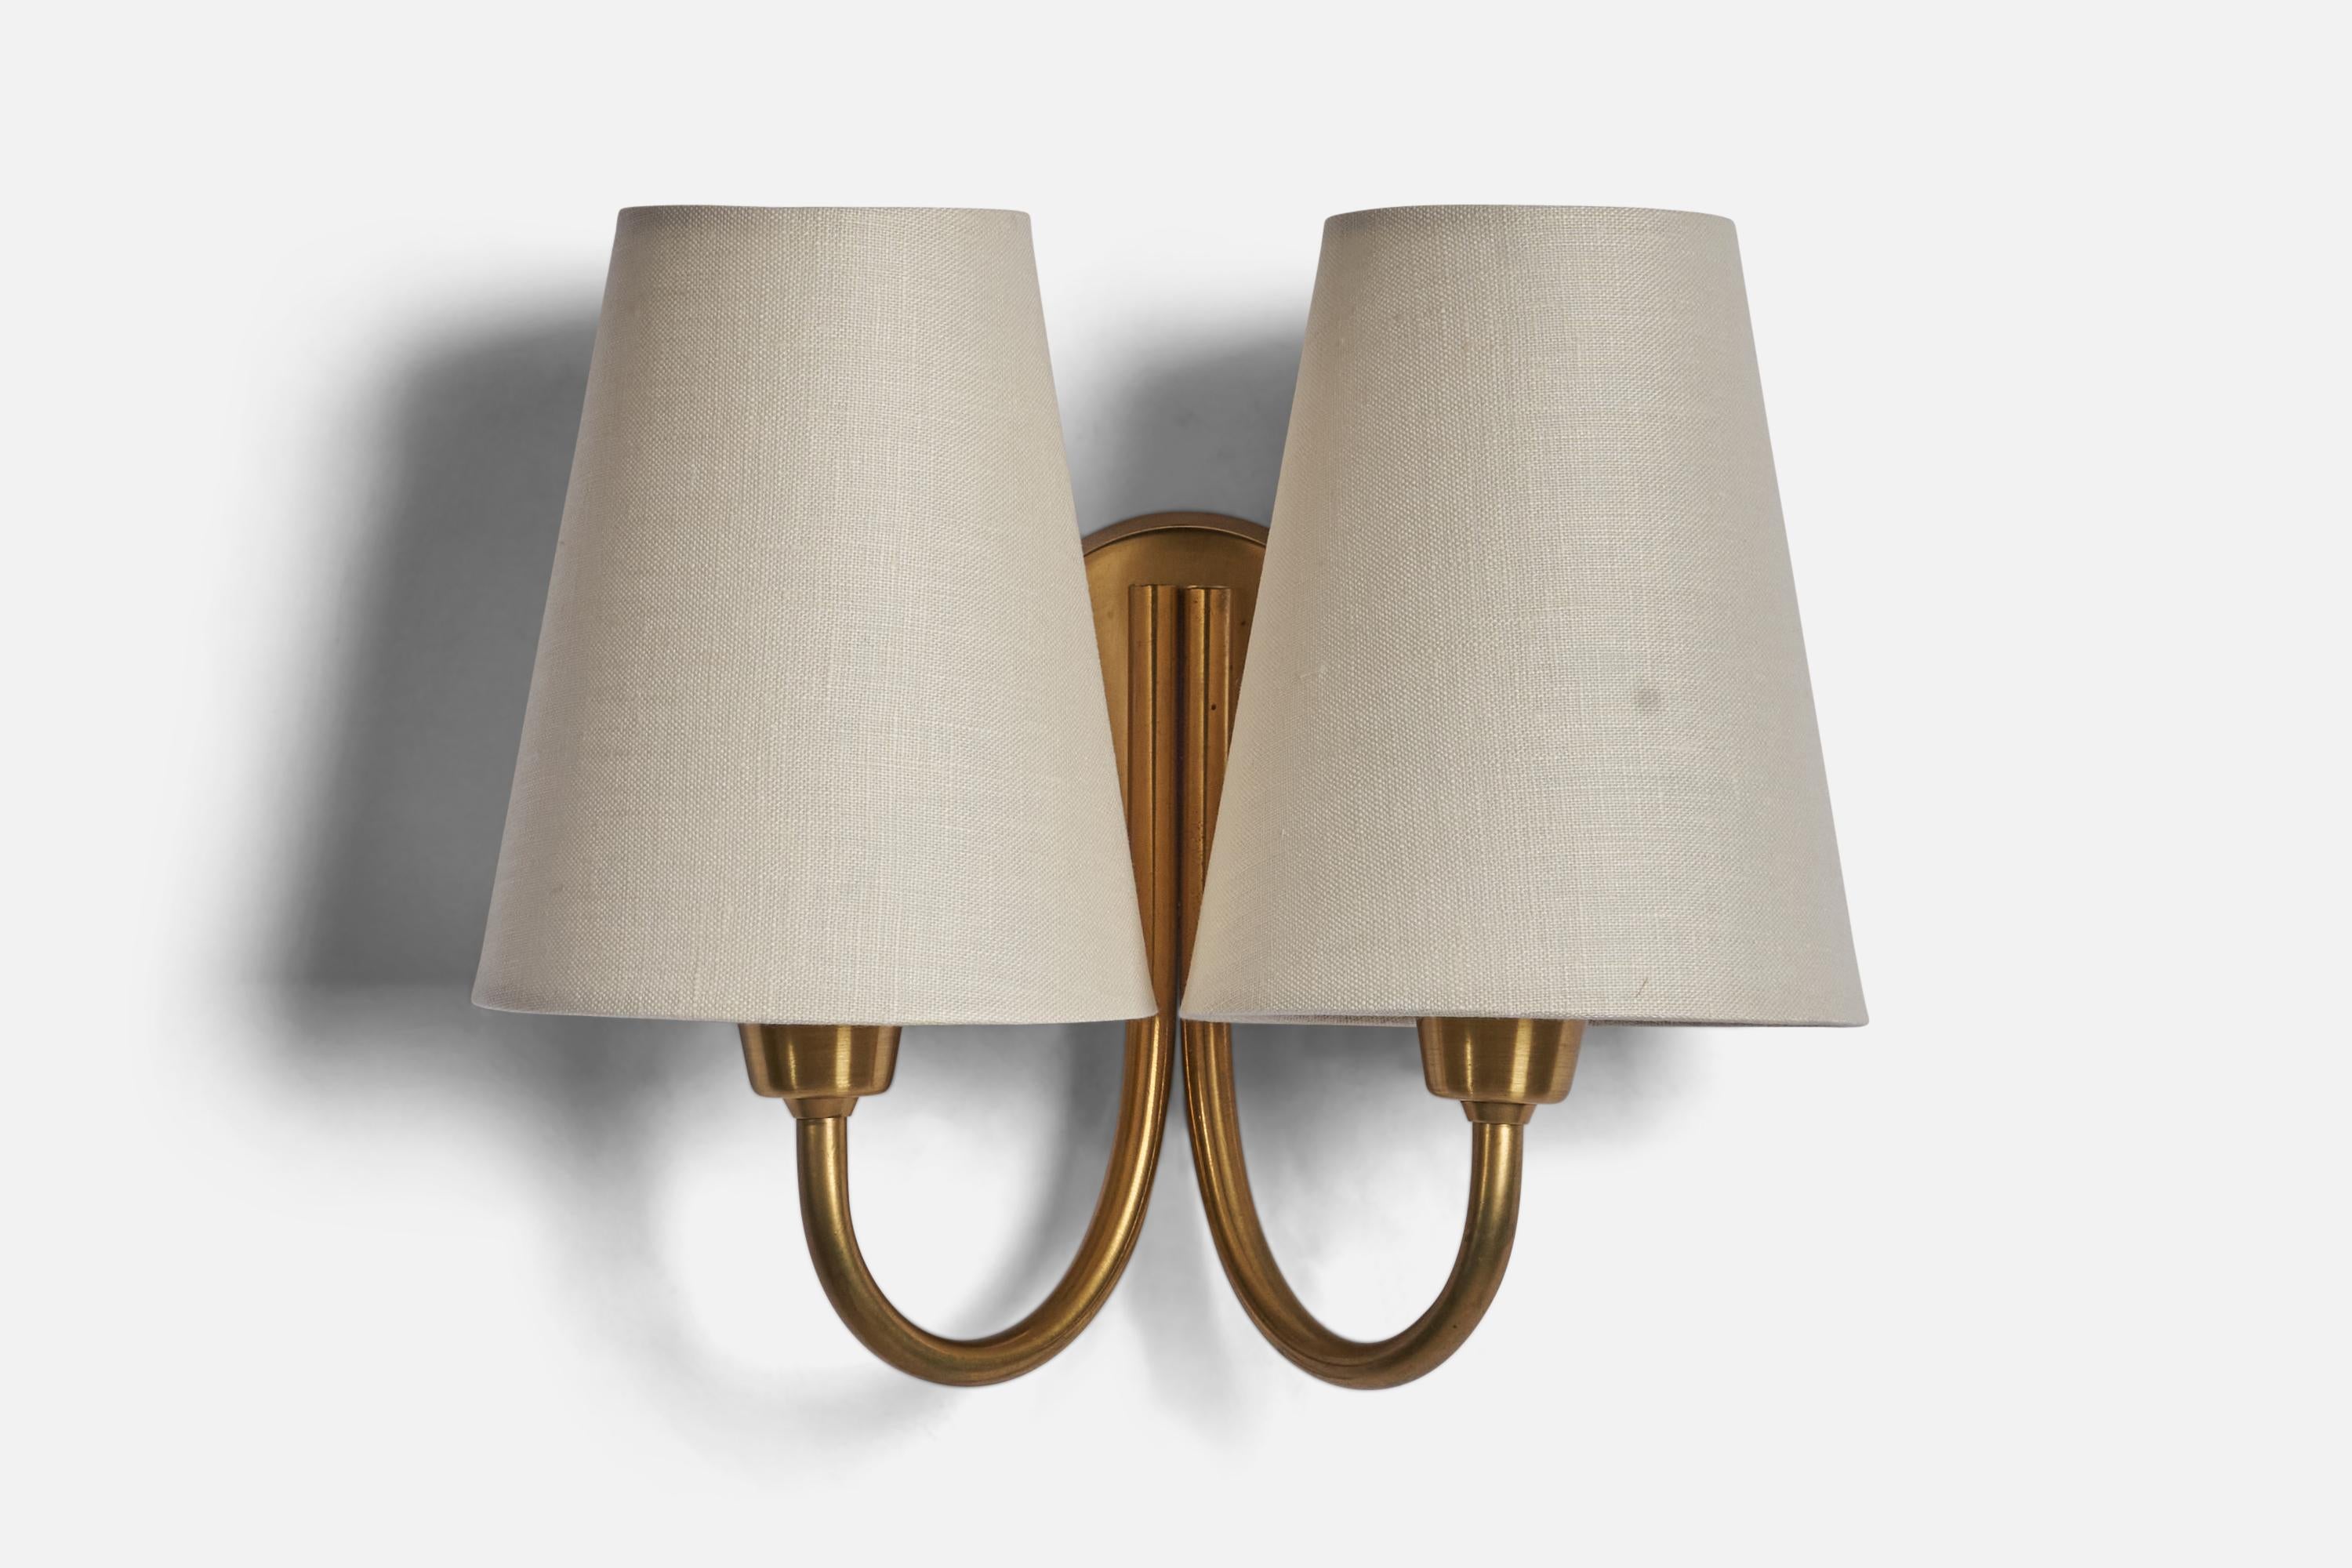 A two-armed brass and fabric wall light designed and produced by 
Fog & Mørup, Denmark, c. 1950s.

Overall Dimensions (inches): 8” H x 9.5” W x 5” D
Bulb Specifications: E-14 Bulb
Number of Sockets: 2
All lighting will be converted for US usage. We